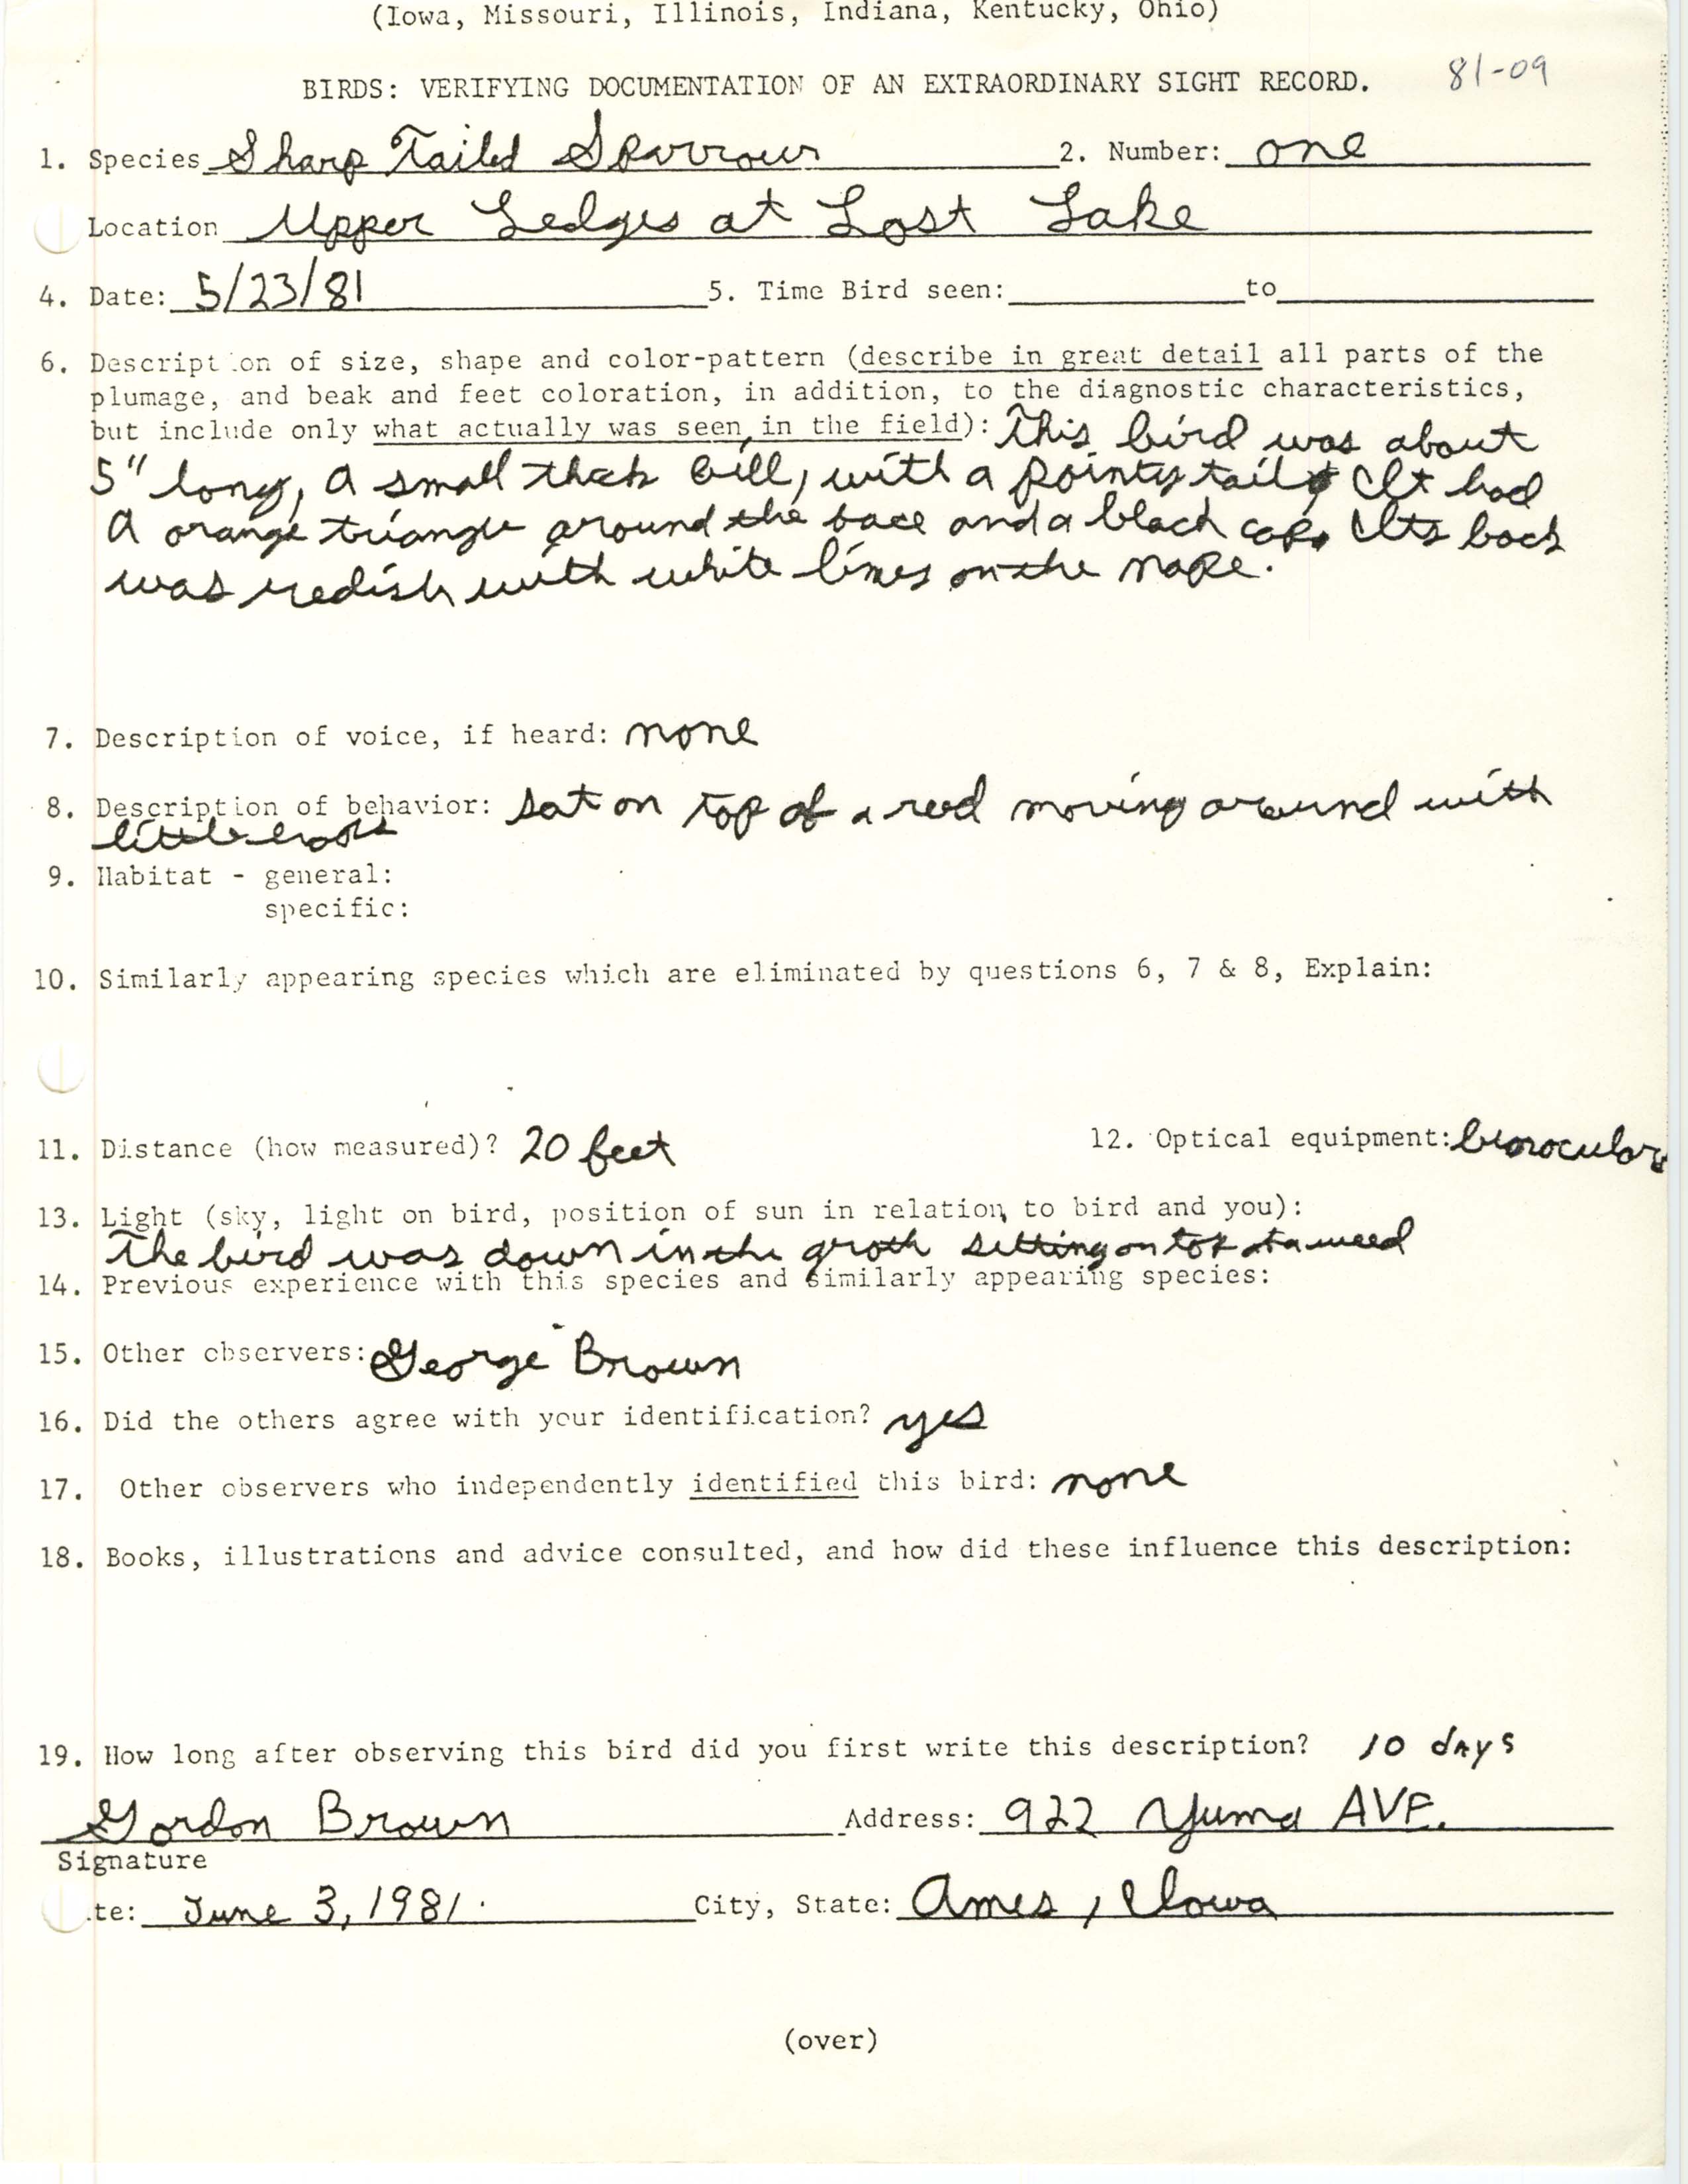 Rare bird documentation form for Sharp-tailed Sparrow at Lost Lake in Boone County, 1981